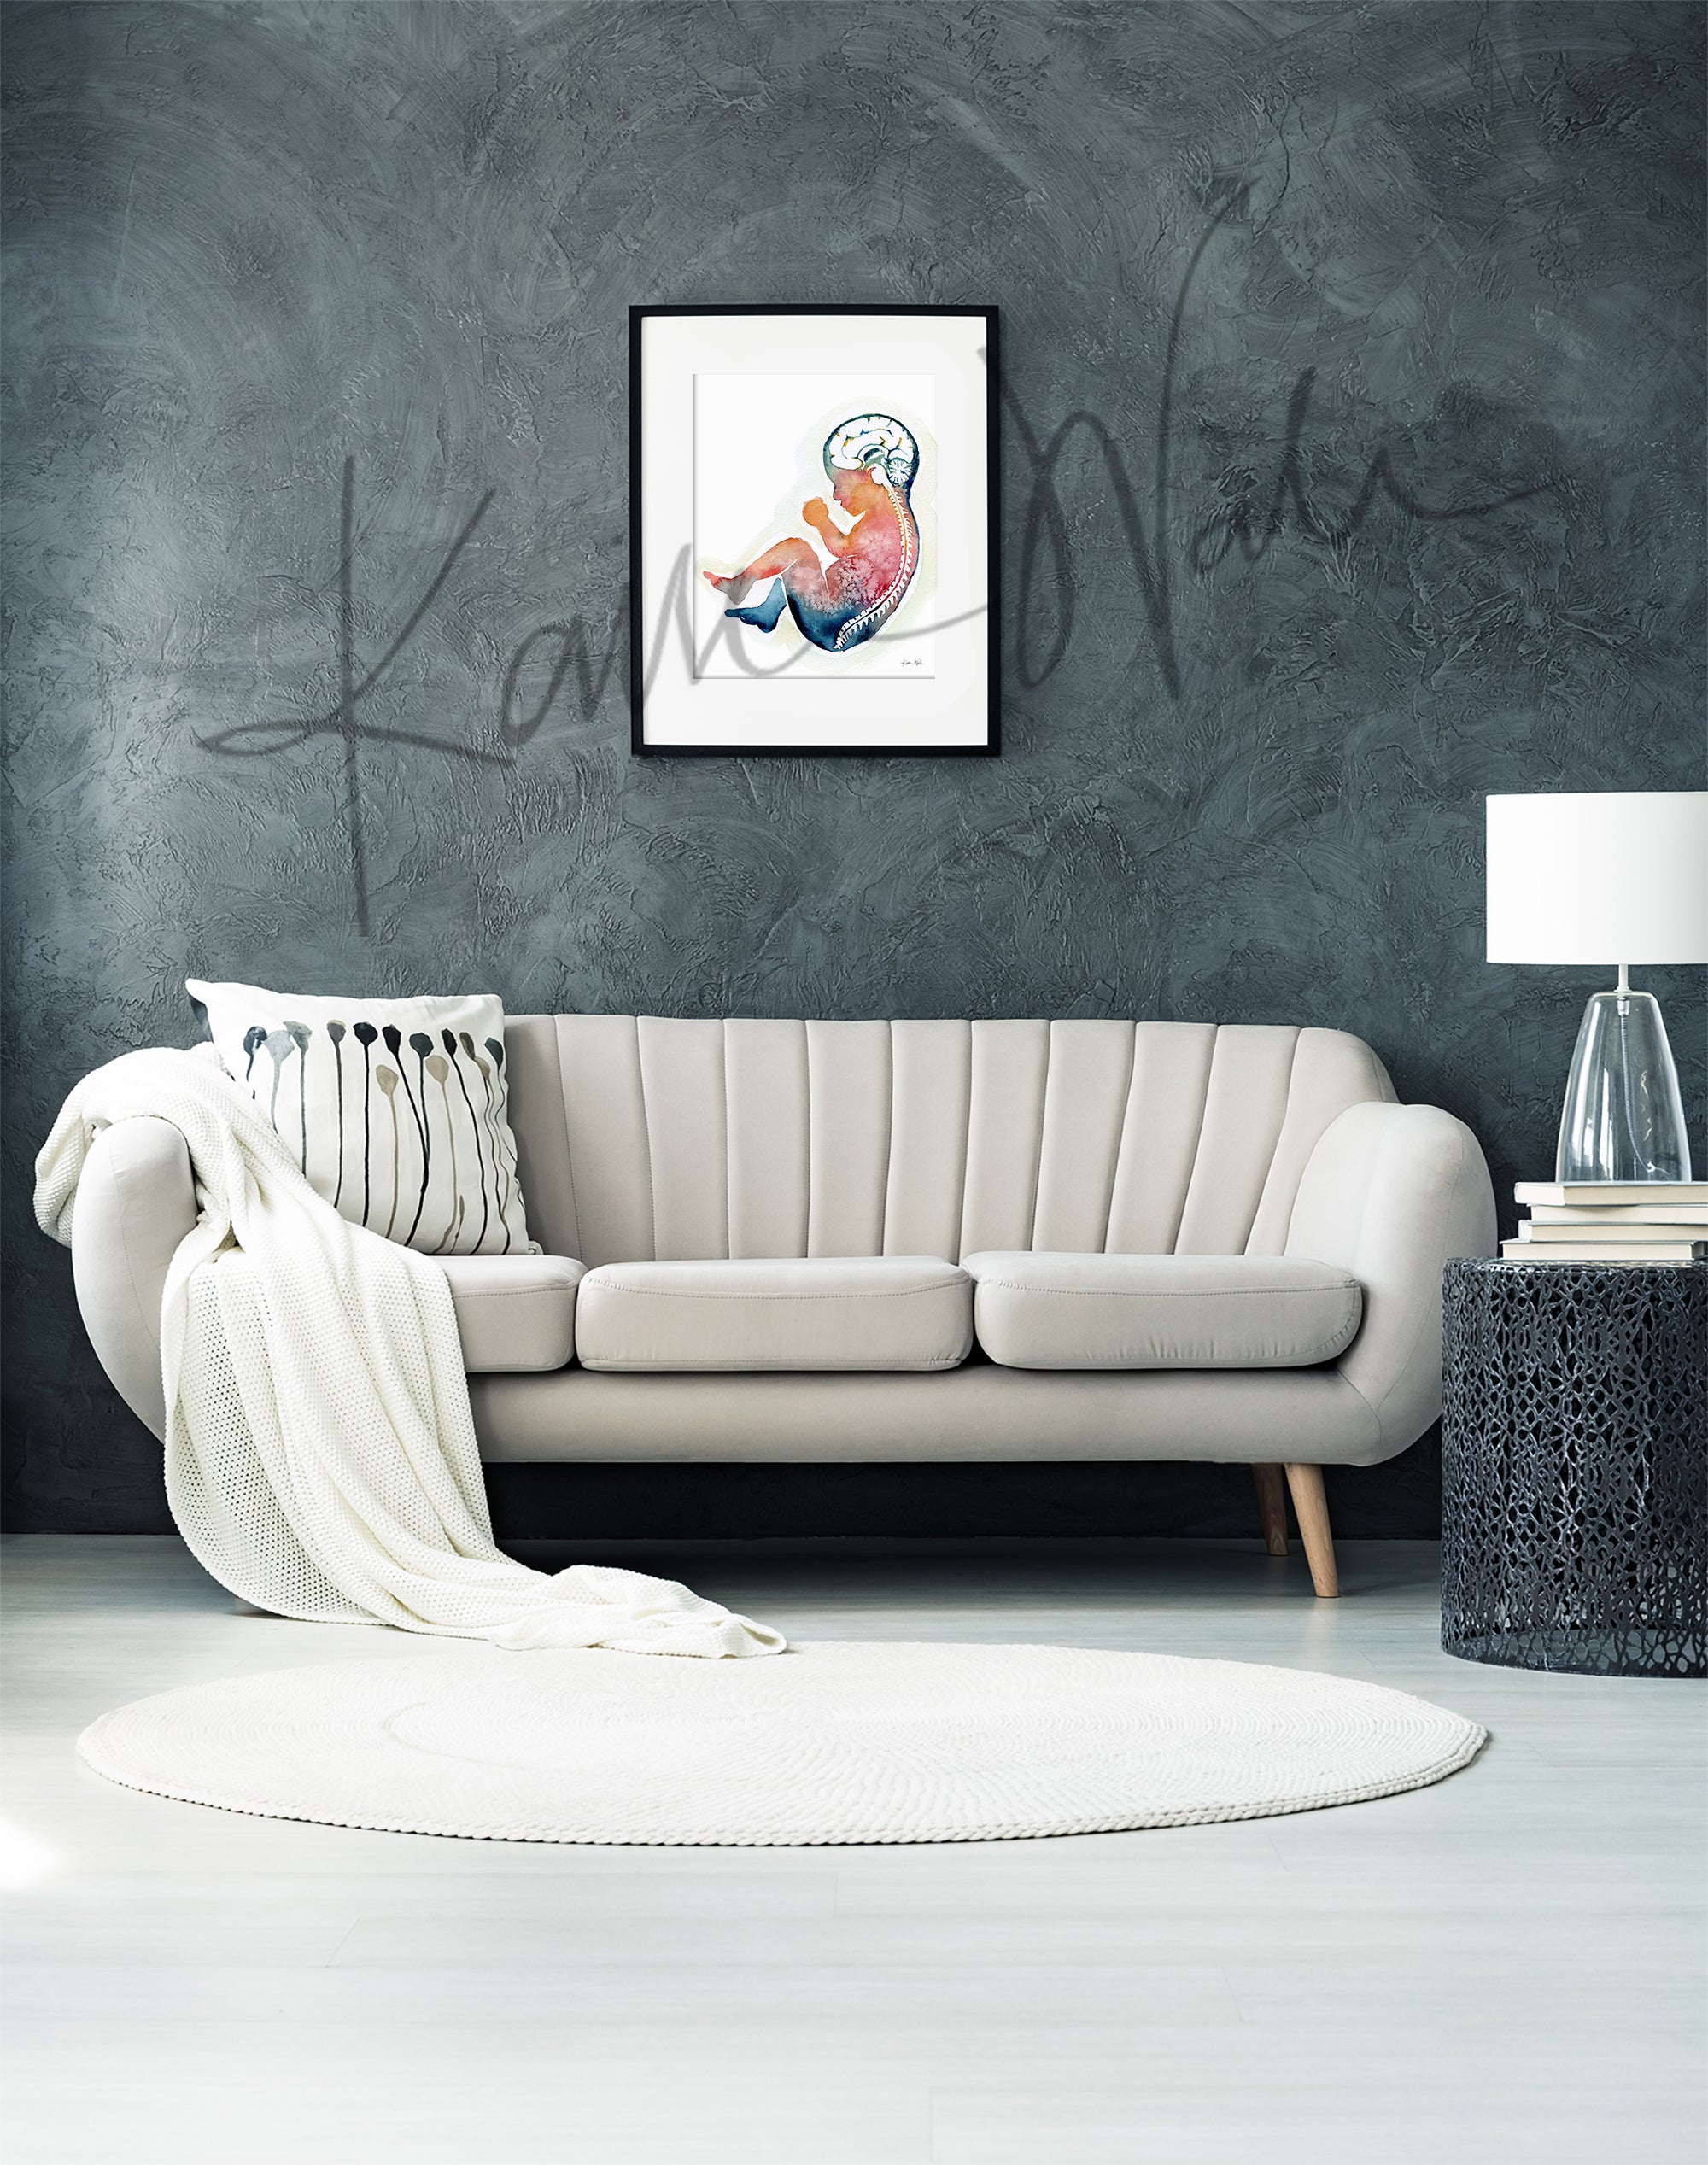 Framed watercolor painting of a fetus showing the spine and brain in rainbow colors. The framed print hangs above a beige couch.